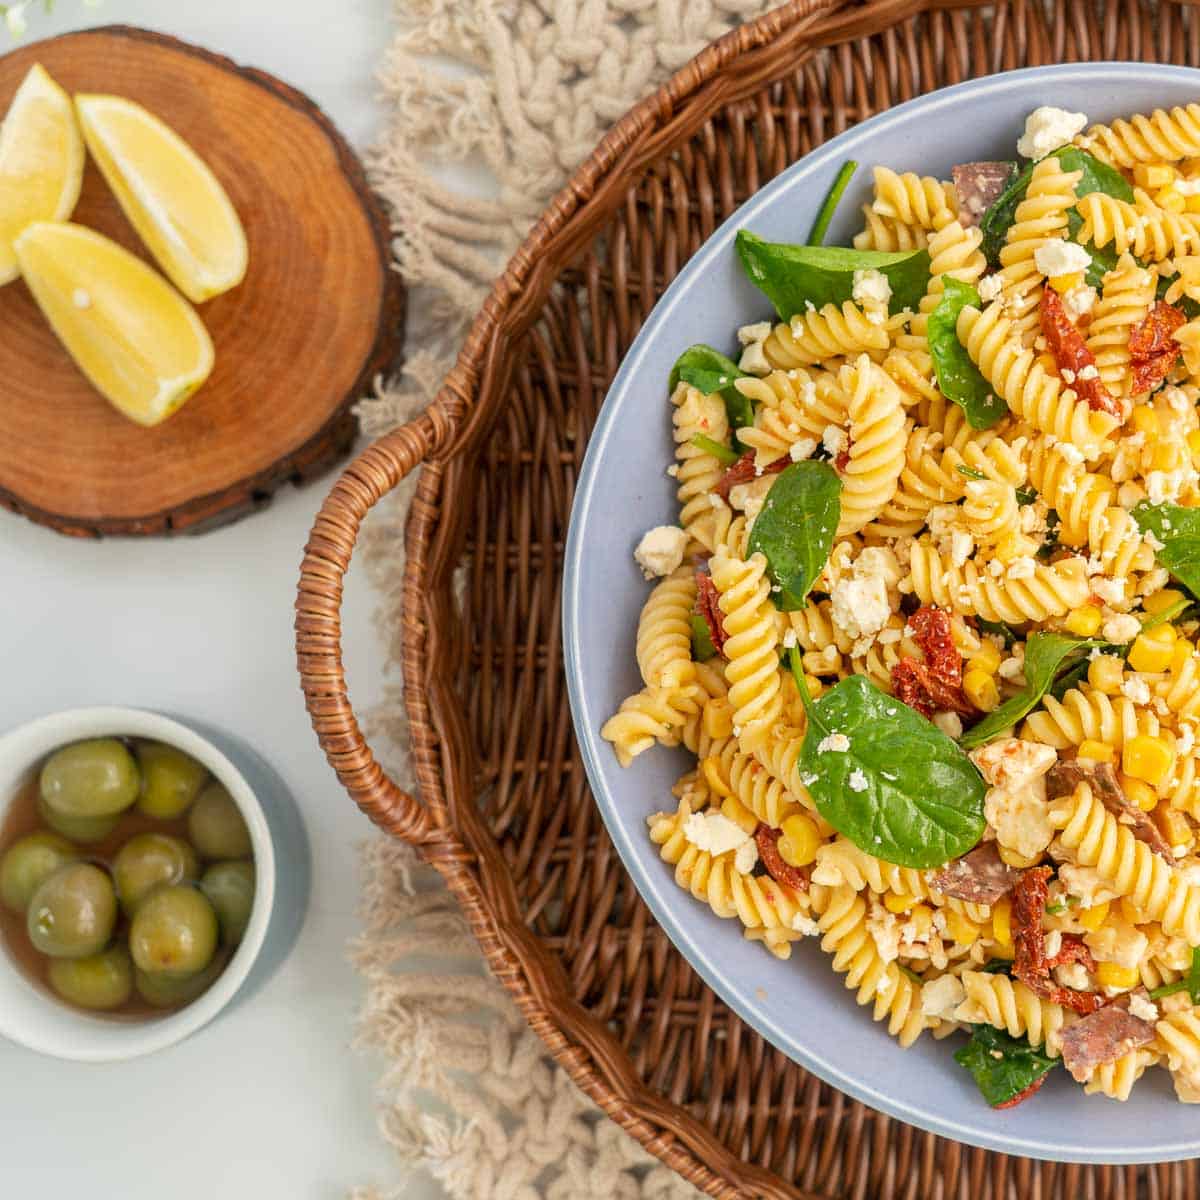 A large bowl of pasta salad with smaller bowls of green olives, lemon wedges and pinenuts. 